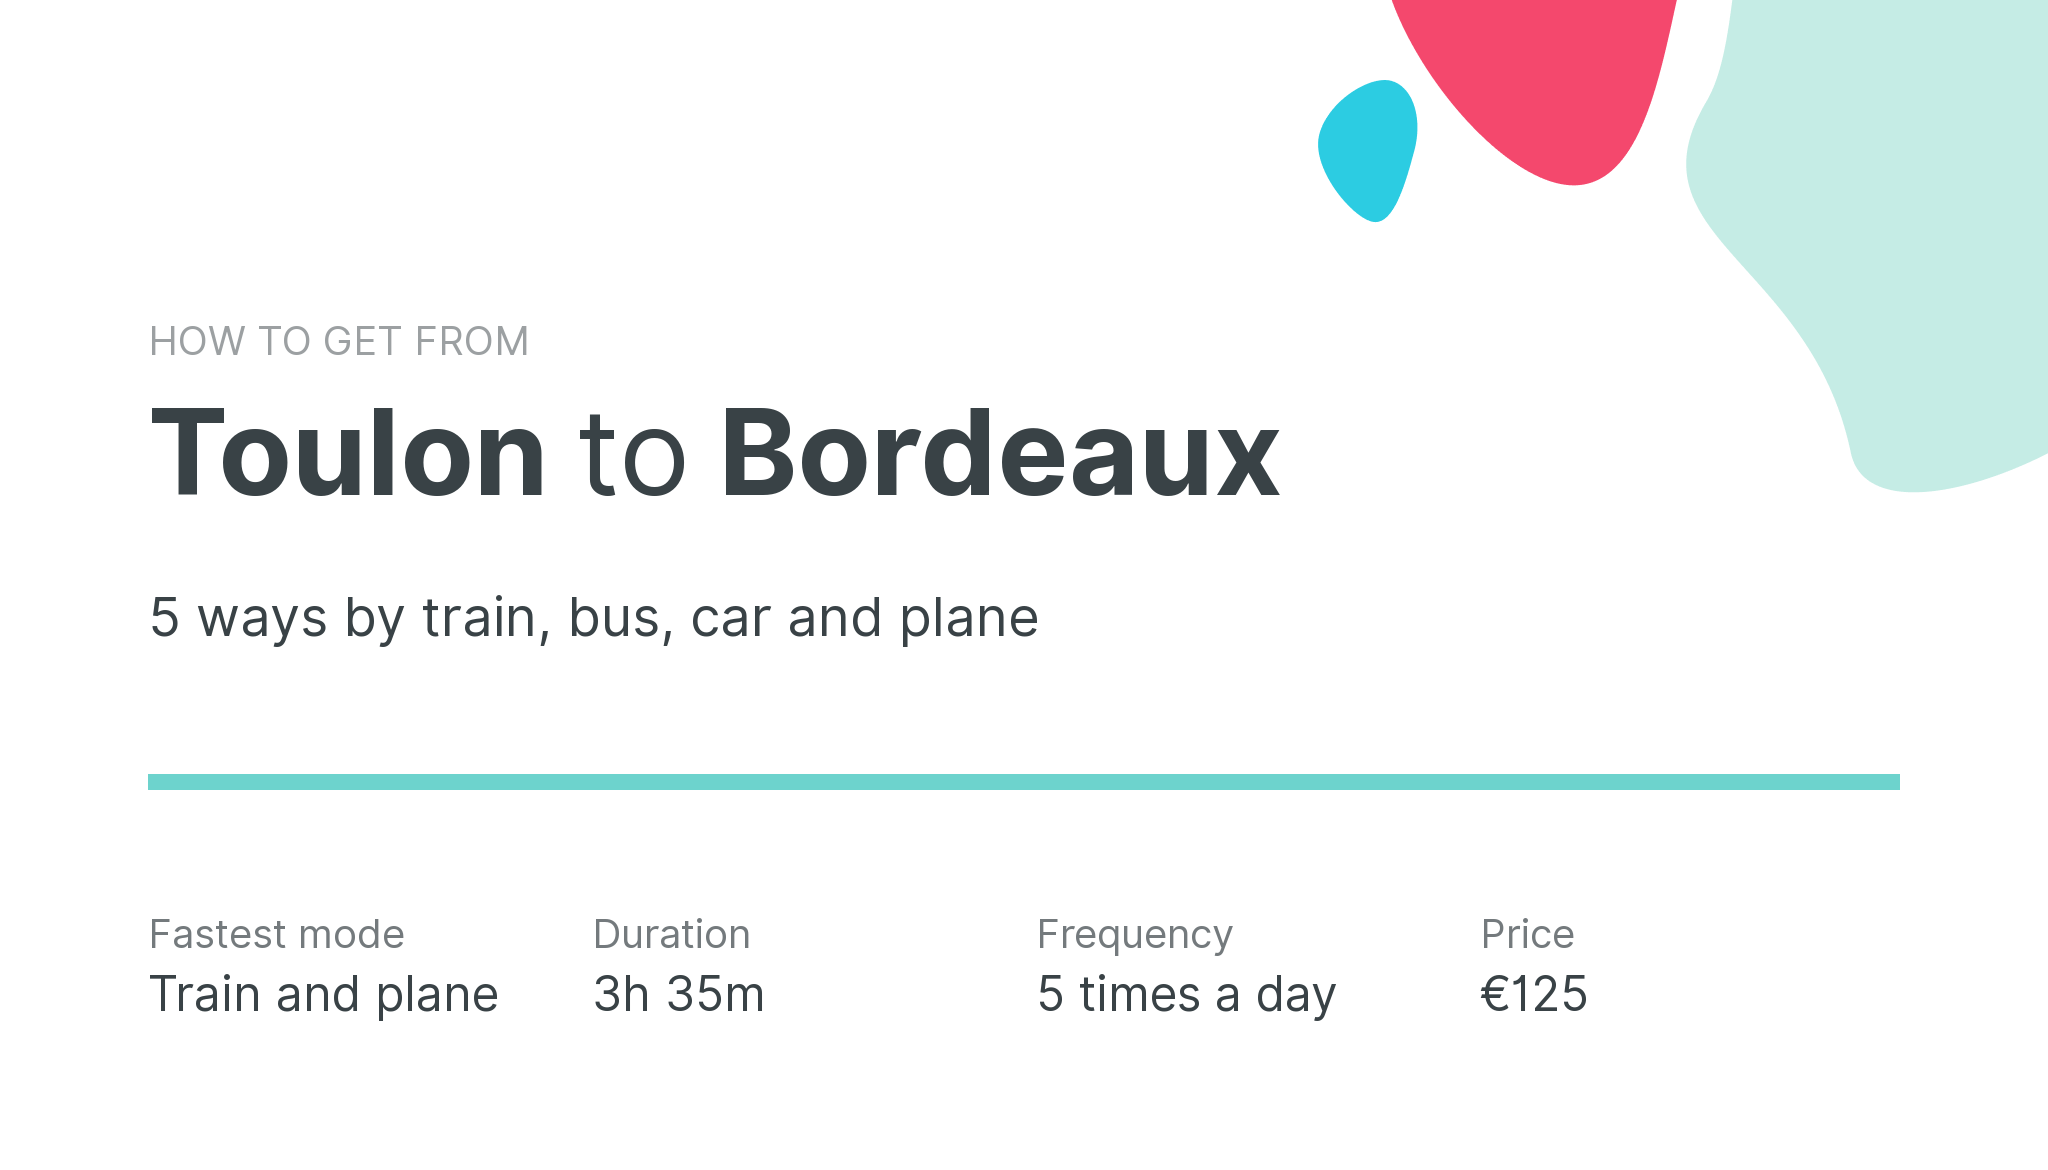 How do I get from Toulon to Bordeaux